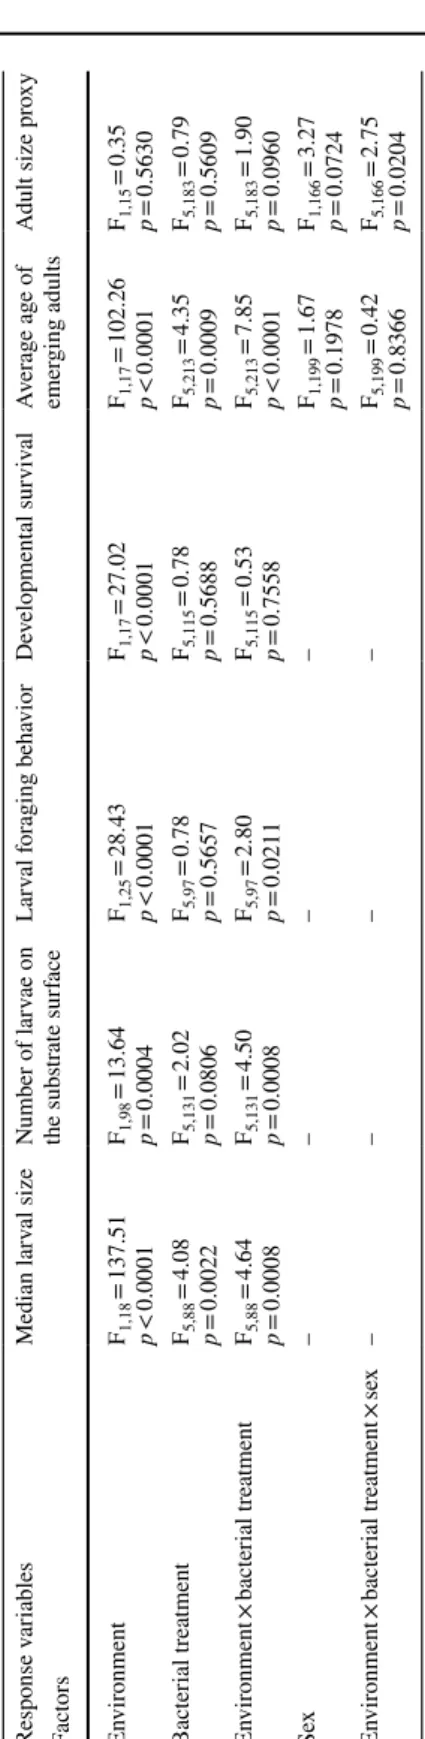 Table 1  analysis of larval and adult phenotypes in response to bacterial treatment and larval environment Linear mixed models (REML), with block as random factorResponse variablesMedian larval sizeNumber of larvae on the substrate surfaceLarval foraging b